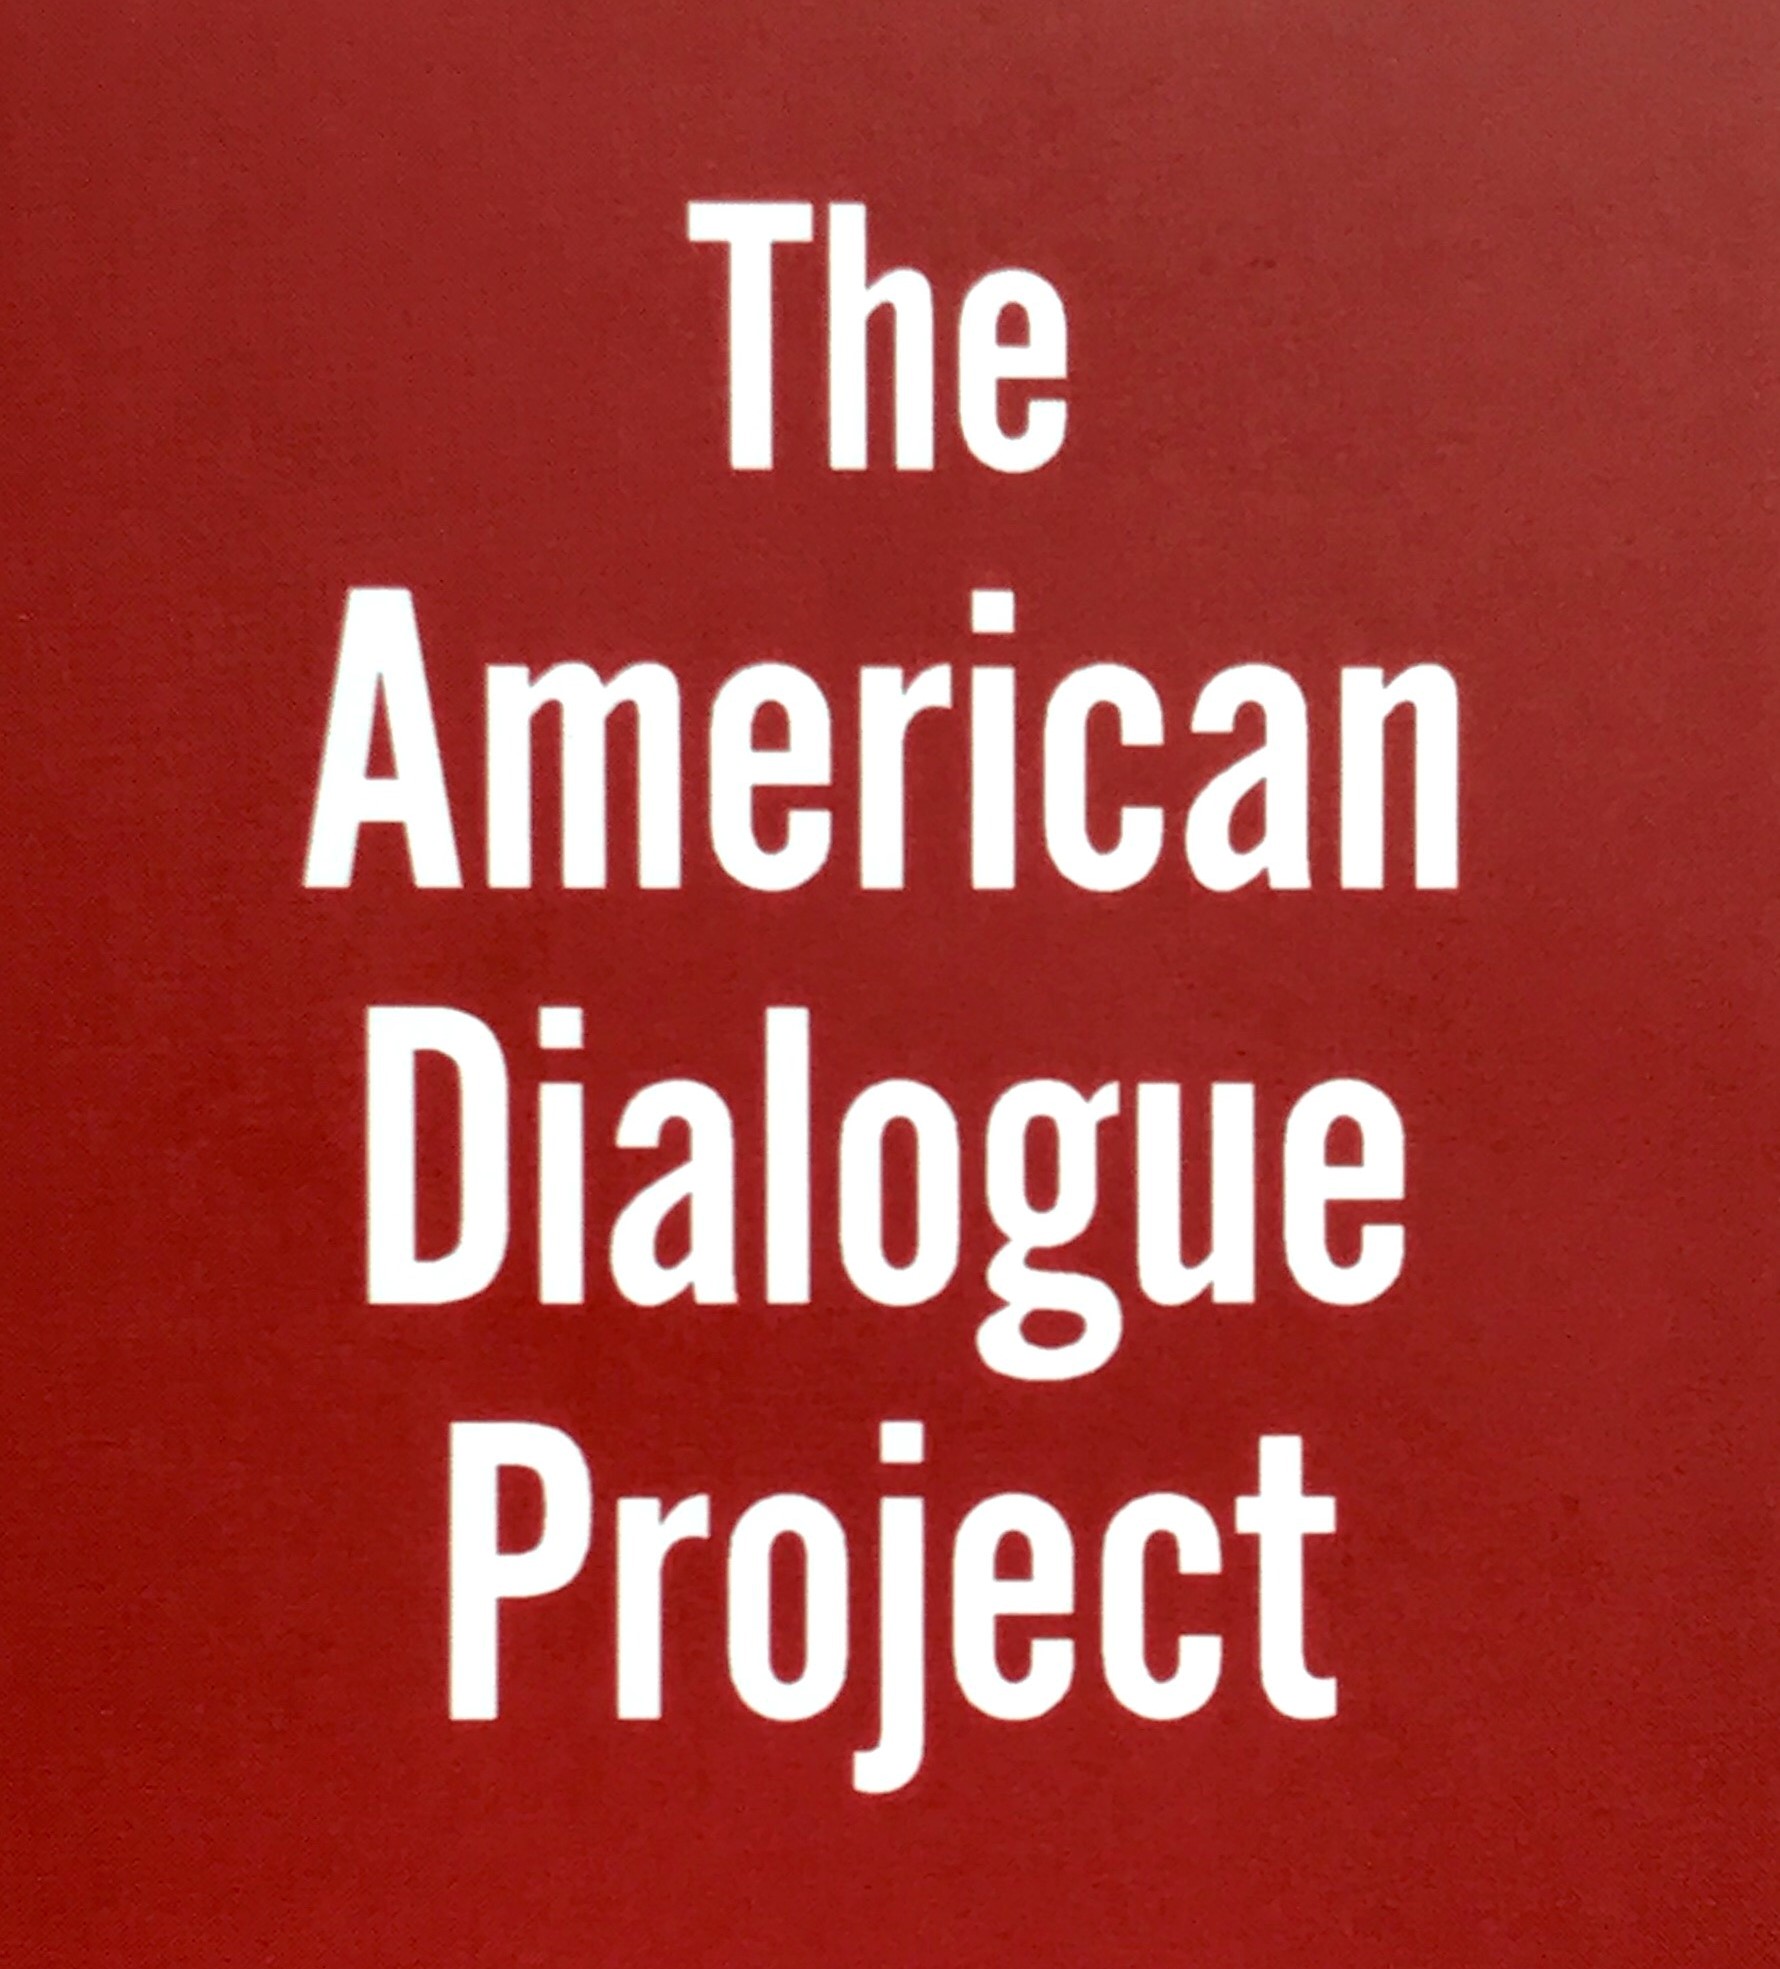 American Dialogue Project.JPG